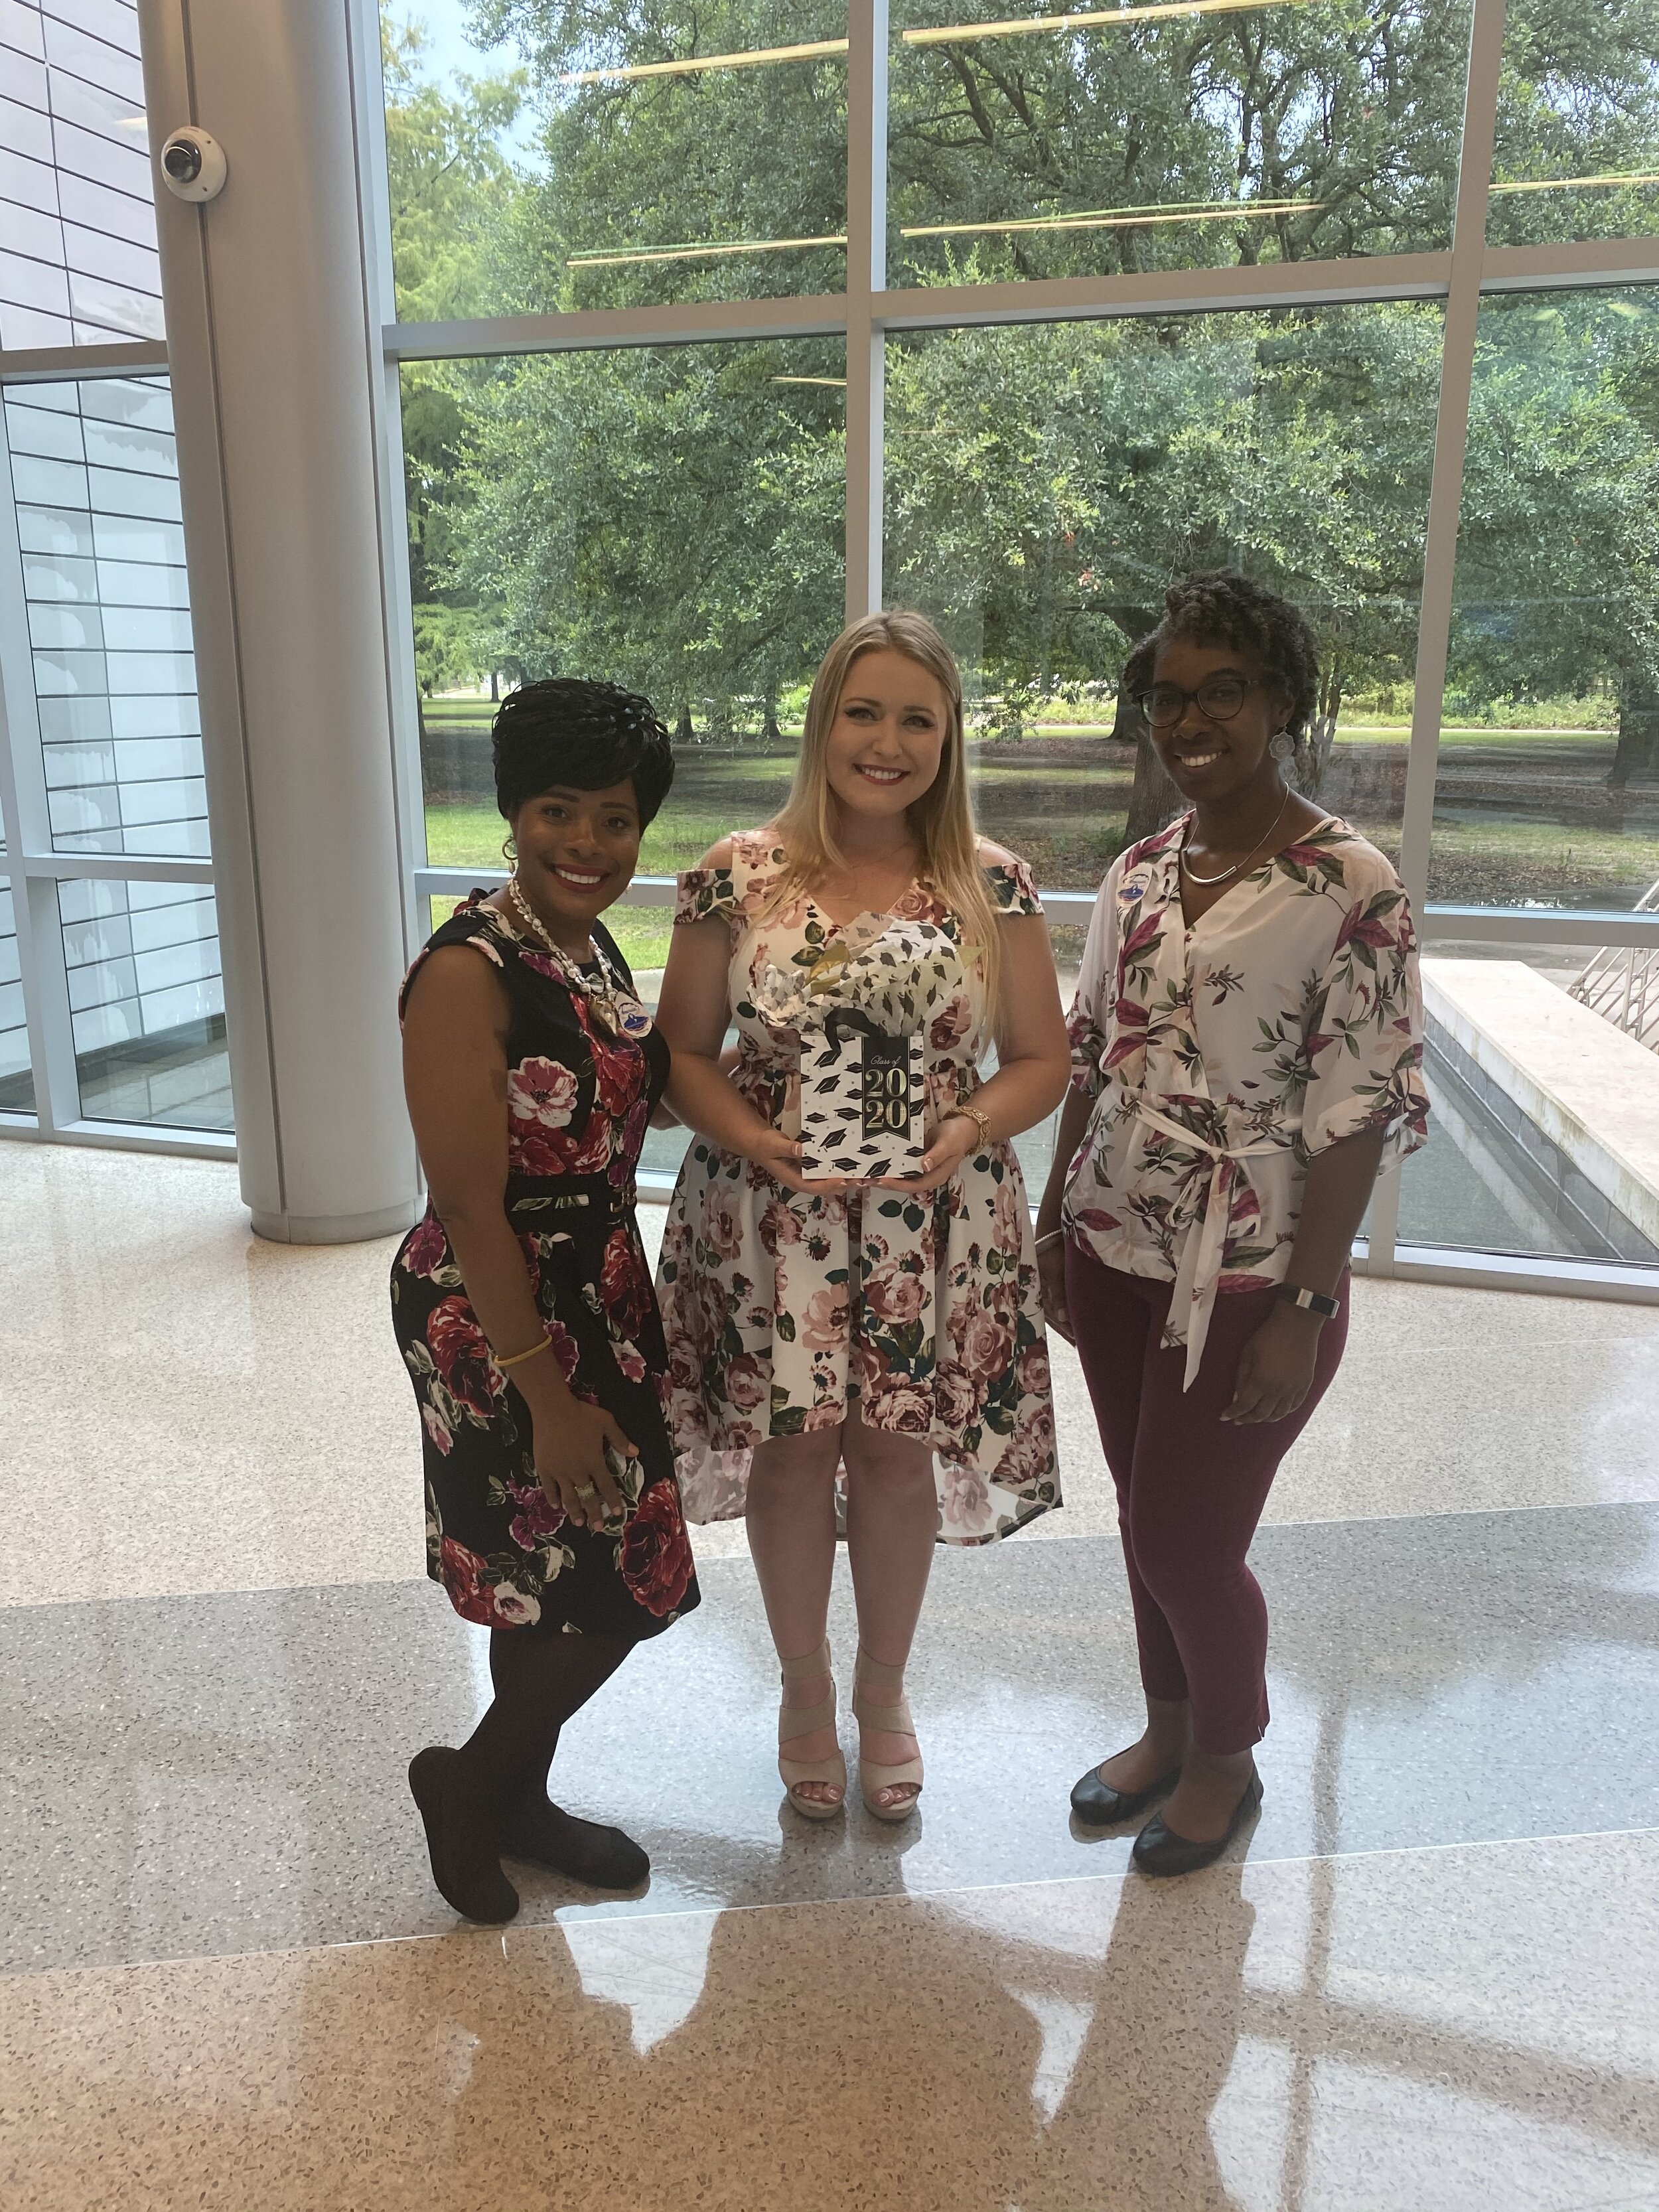 On June 21, AMOA Saluted Ms. Kaleigh H. of Baton Rouge Community College at the Goodwood Library!